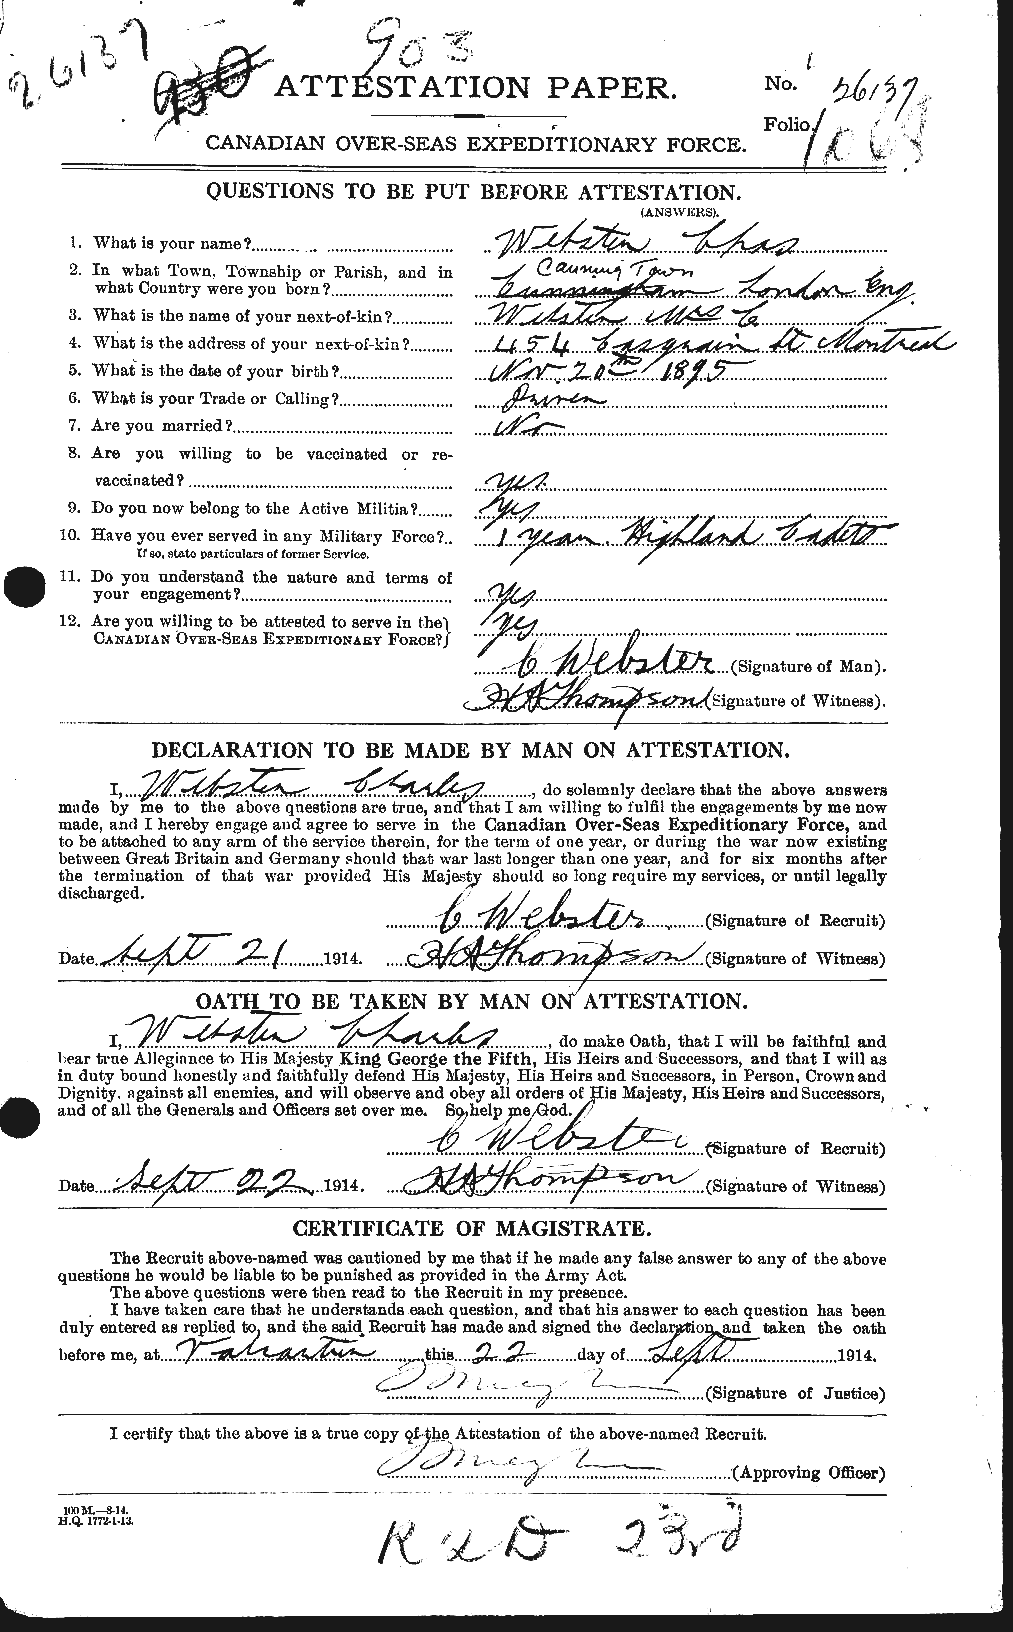 Personnel Records of the First World War - CEF 670291a